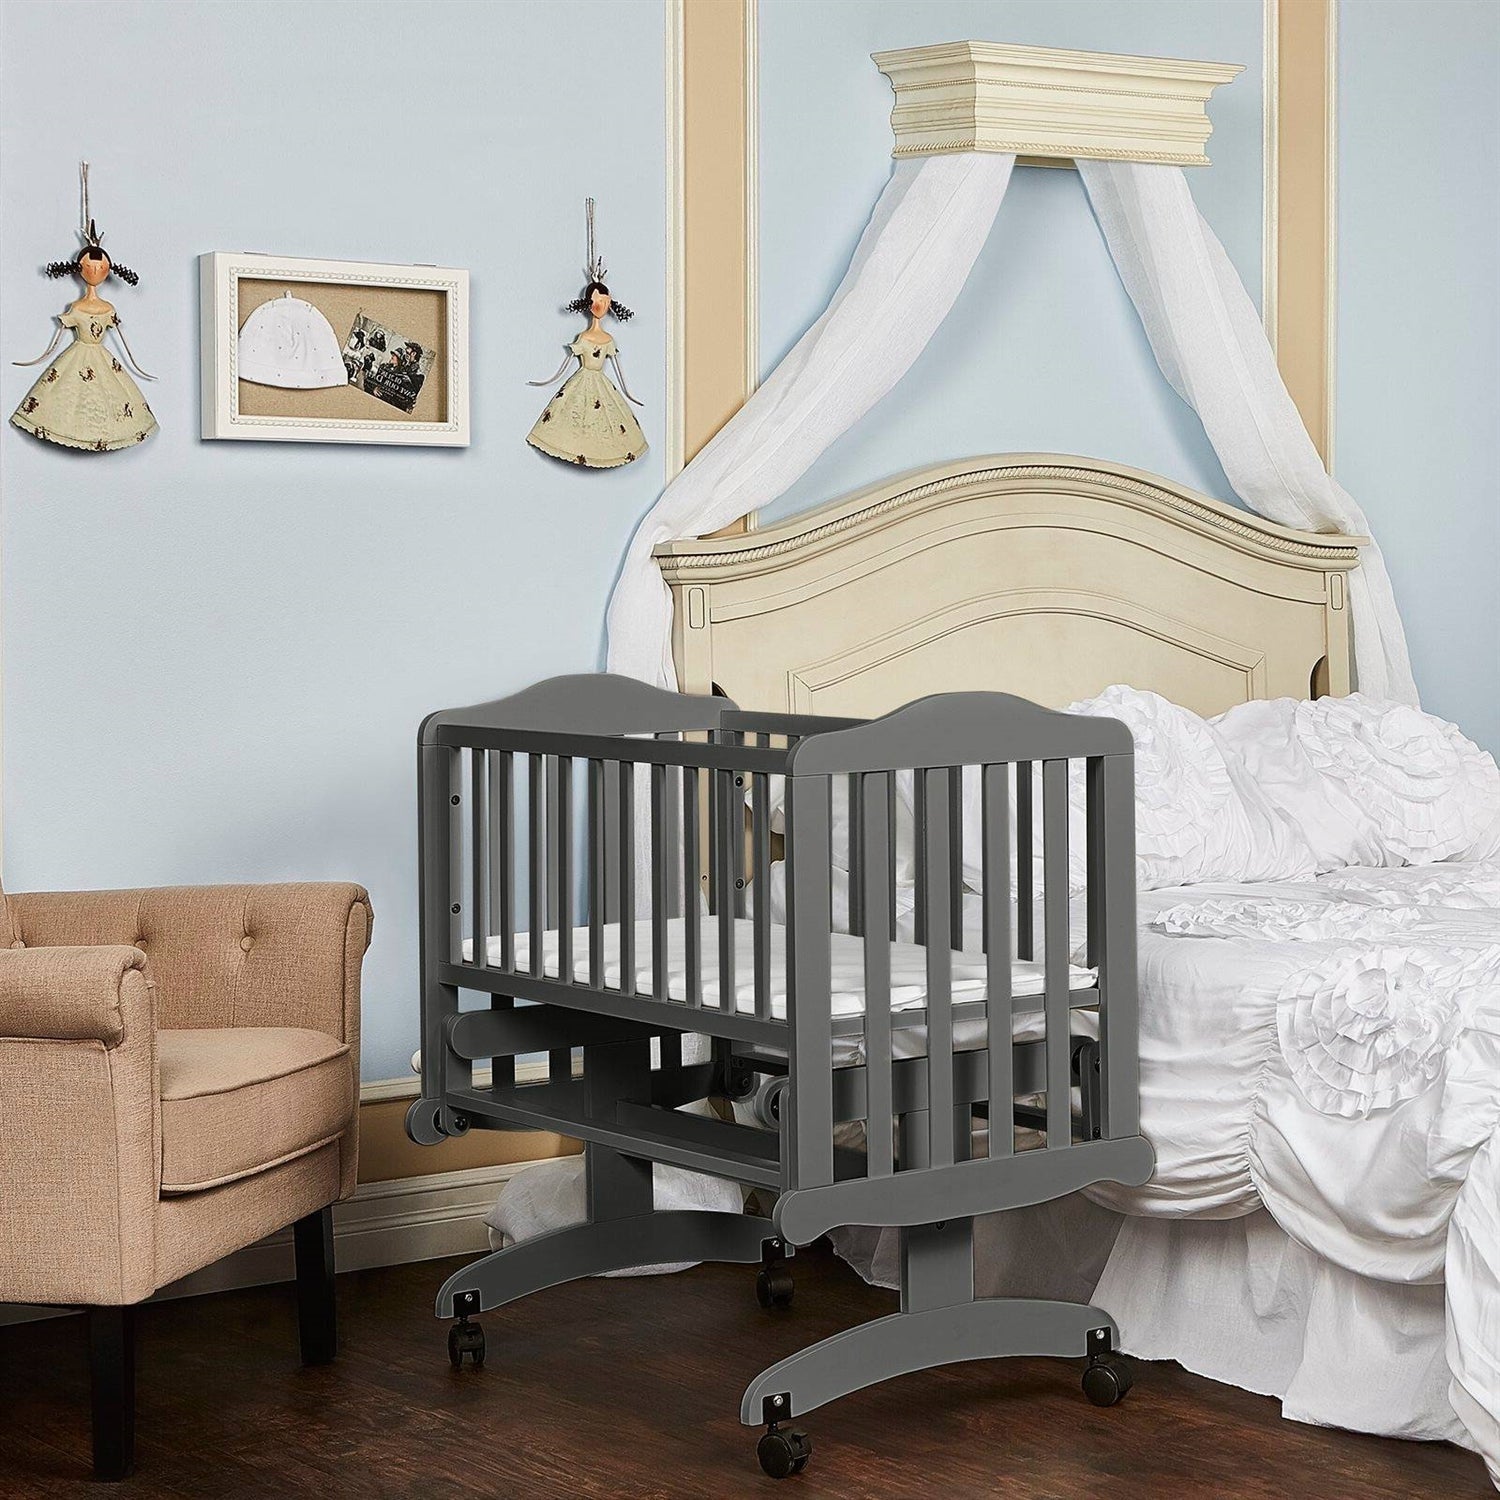 Bedroom > Baby & Kids - Grey Rock A Bye Baby Glider Cradle With Locking Casters And Crib Mattress